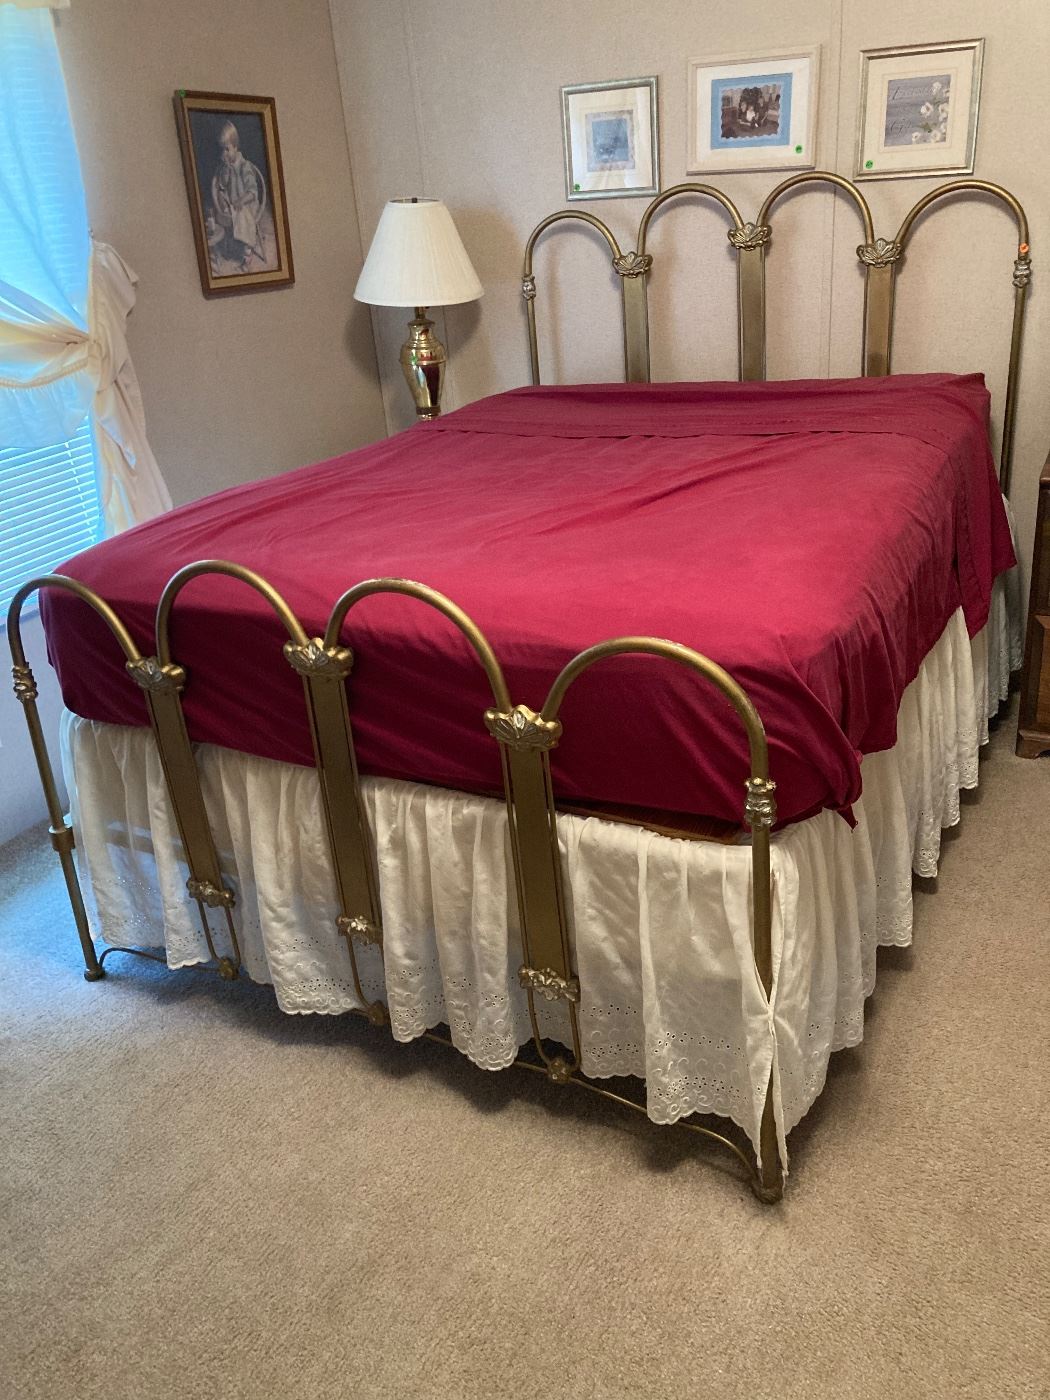 Beautiful gold iron bed, full size
WE PRE-SALE FURNITURE! Contact us to make an appointment: Bill Anderson 615-585-9301 or Diane Cox 865-617-0420